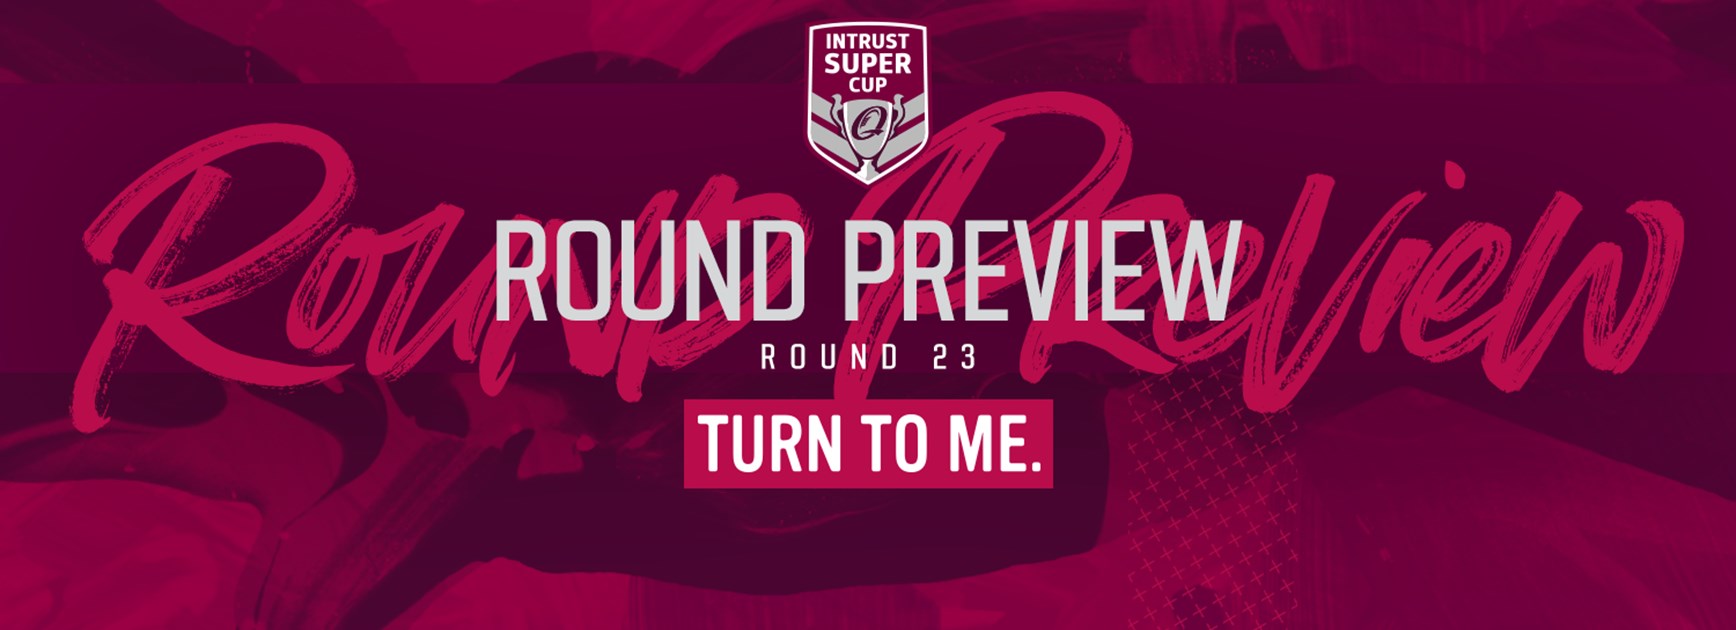 Intrust Super Cup Round 23 Turn to Me preview